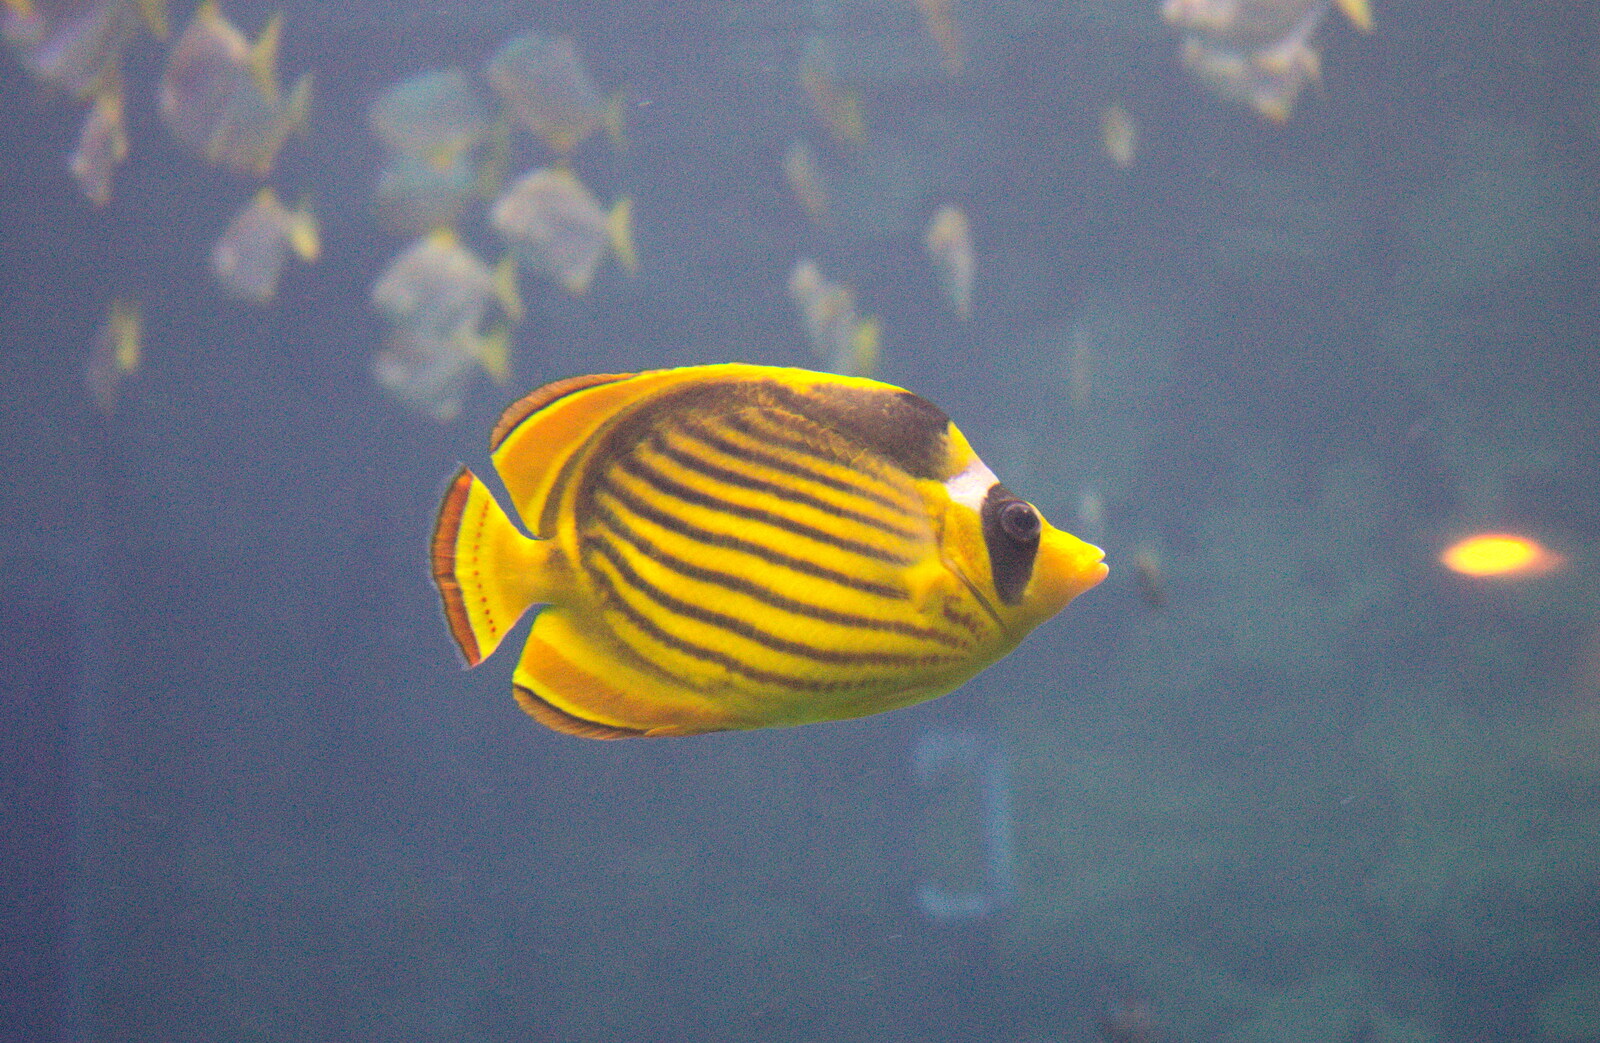 A stripey yellow fish from A Visit to the Aquarium, The Barbican and Dartmoor, Plymouth, Devon - 10th June 2012